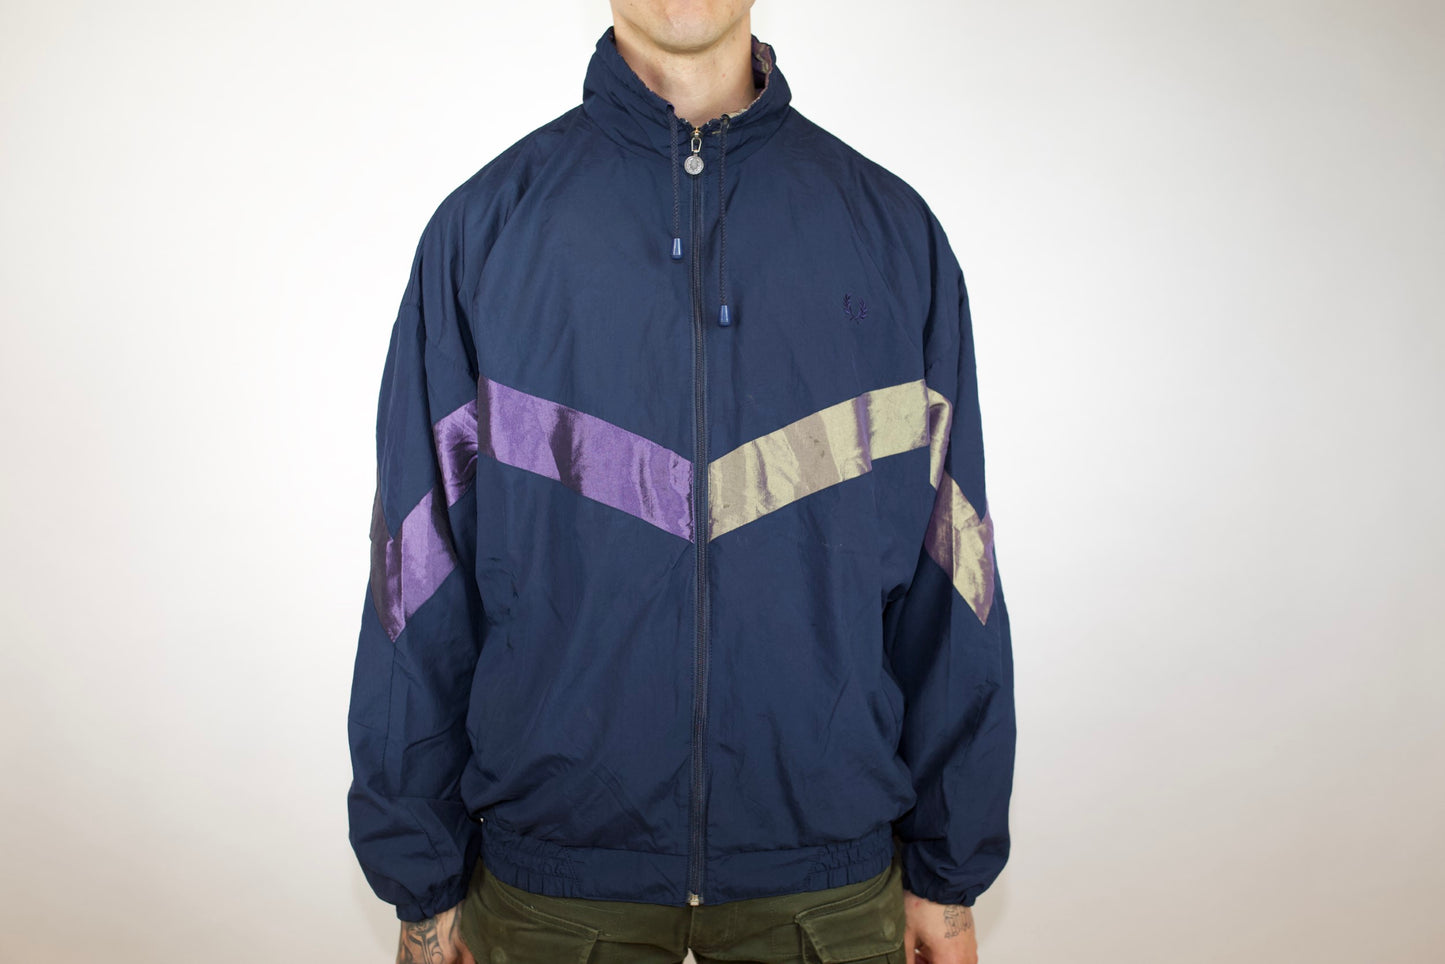 VINTAGE NAVY/PURPLE/GOLD FRED PERRY SPRAY JACKET (XL)